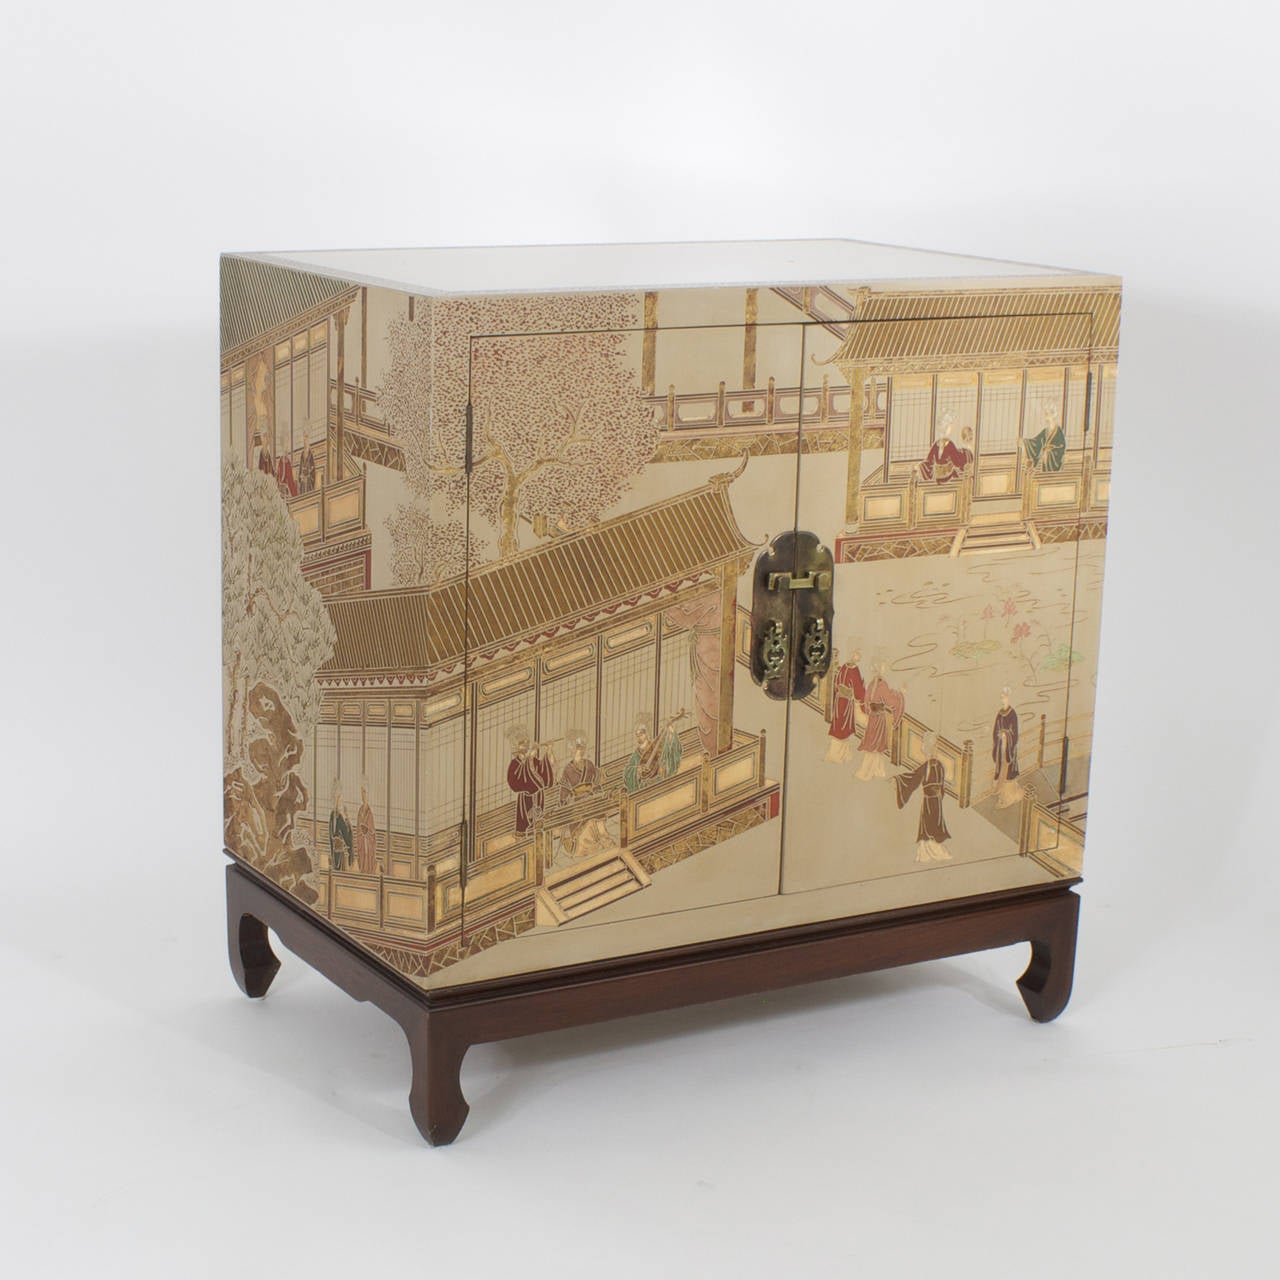 Chic pair of chinoiserie decorated Maitland-Smith cabinets or nightstands with bold scale and executed in moody subtle colors, depicting scenes from the Forbidden City, all on a varnished Asian Style base, with glass shelves and plenty of storage